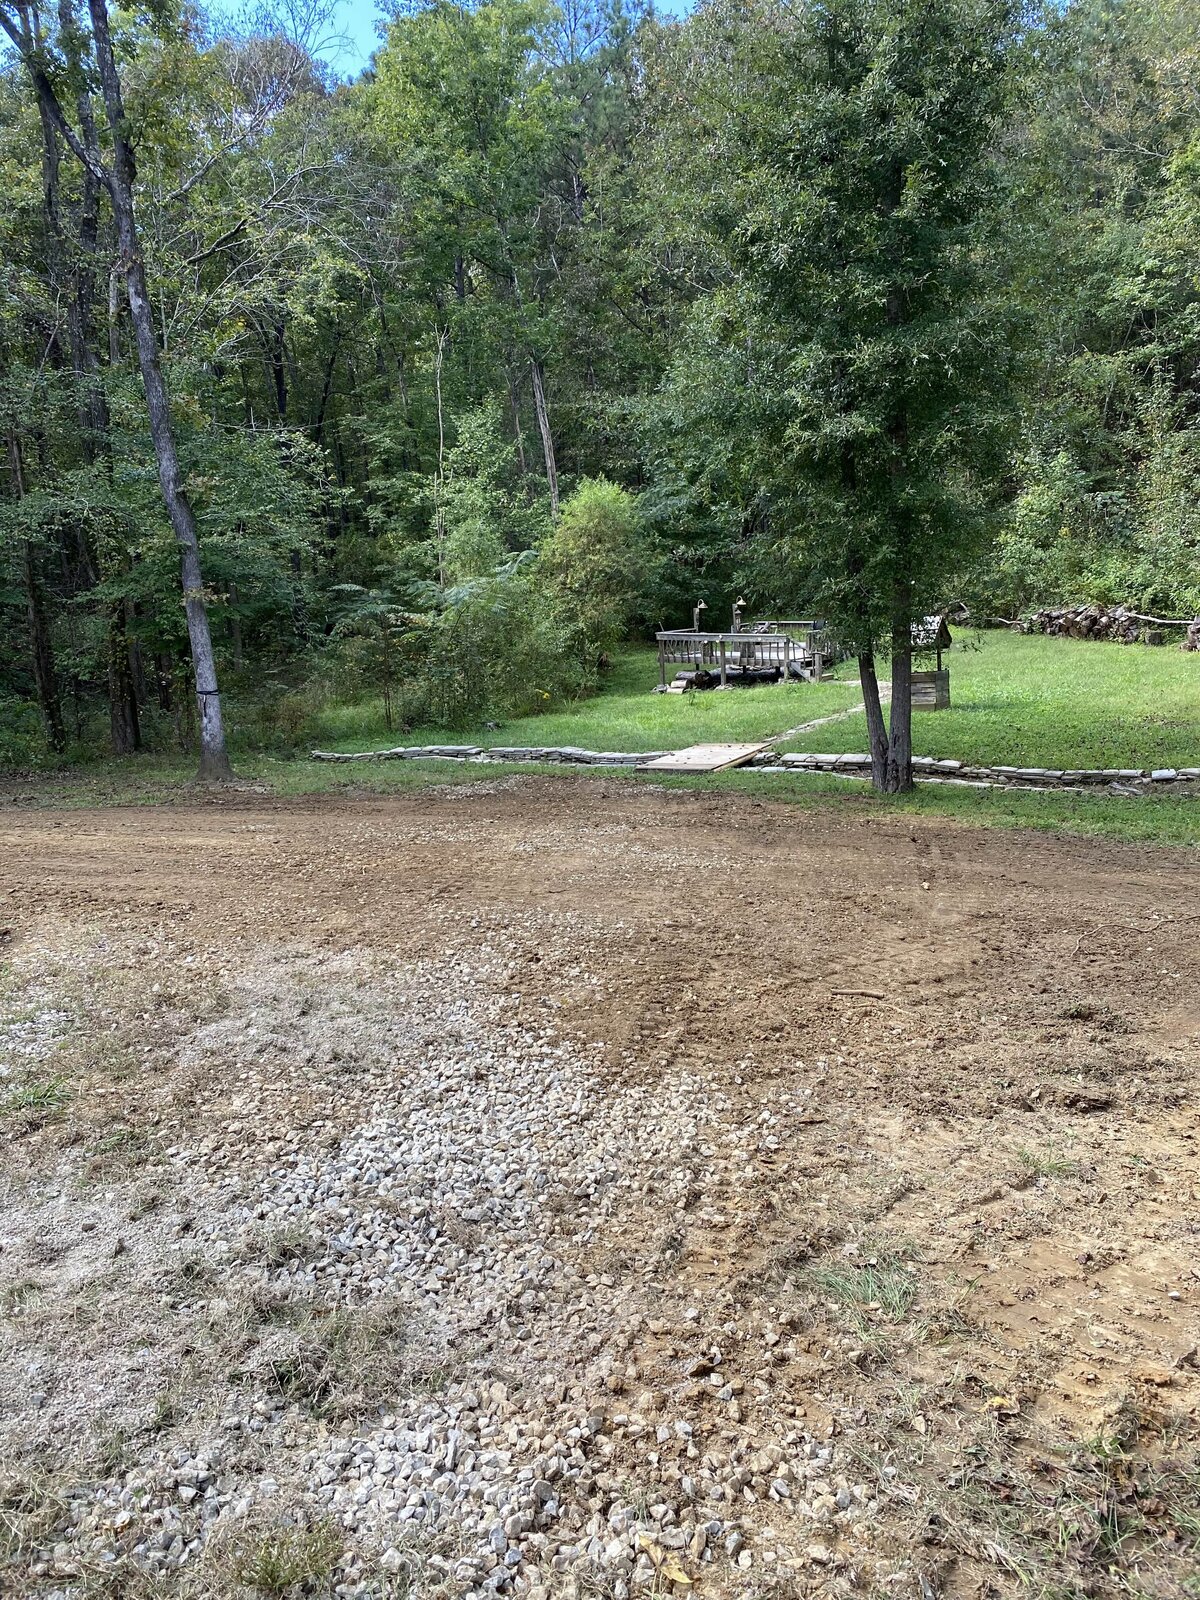 gravel-area-in-front-of-trees-and-grass